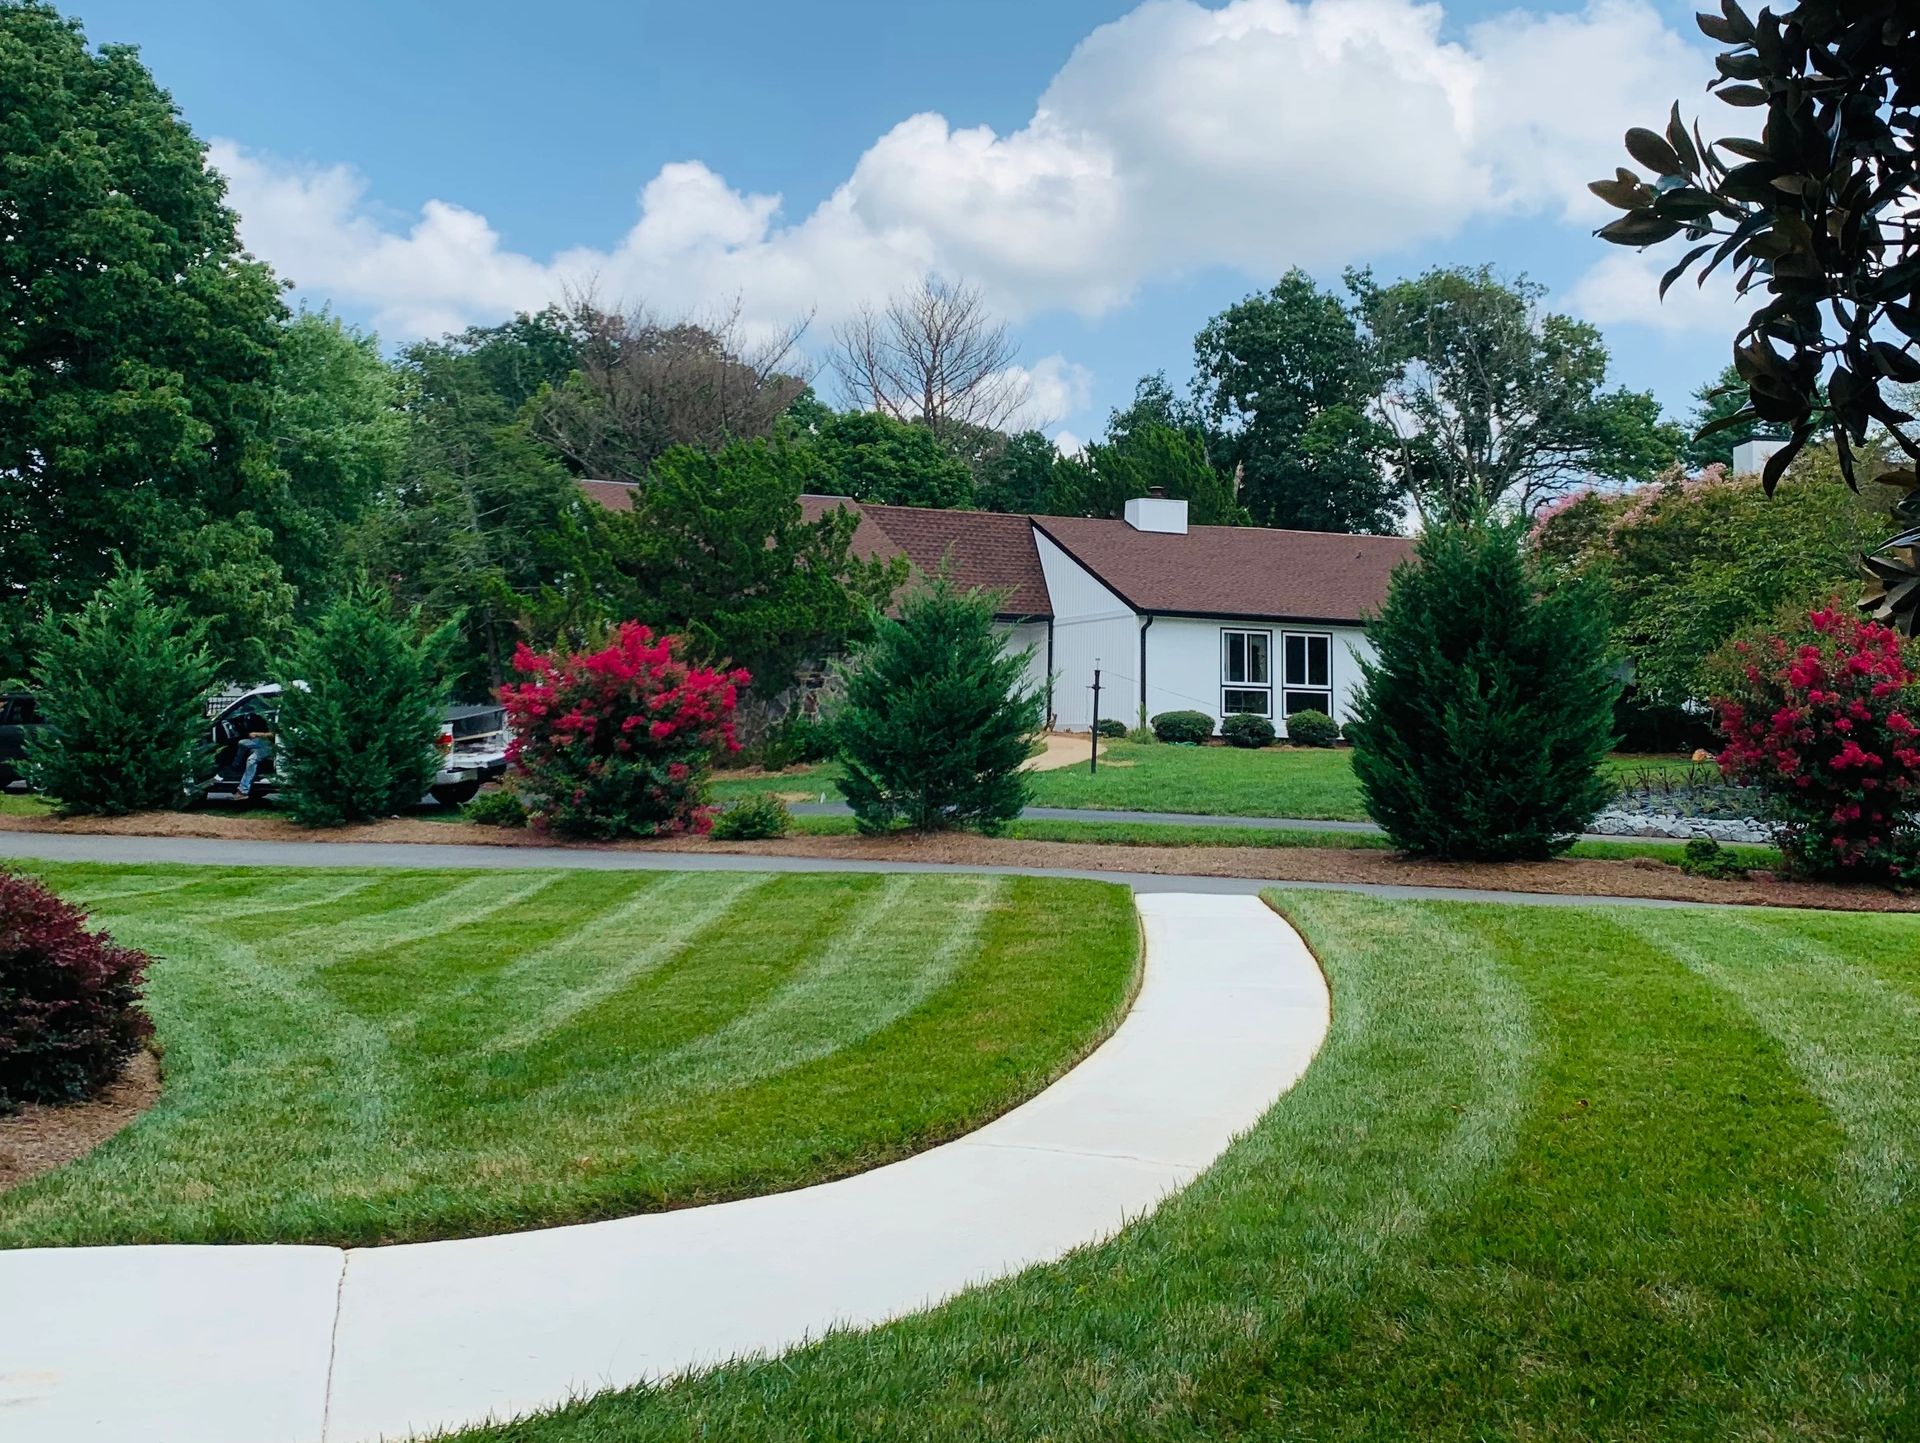 A well-manicured lawn with curved stripes pattern in front of a one-story white house 